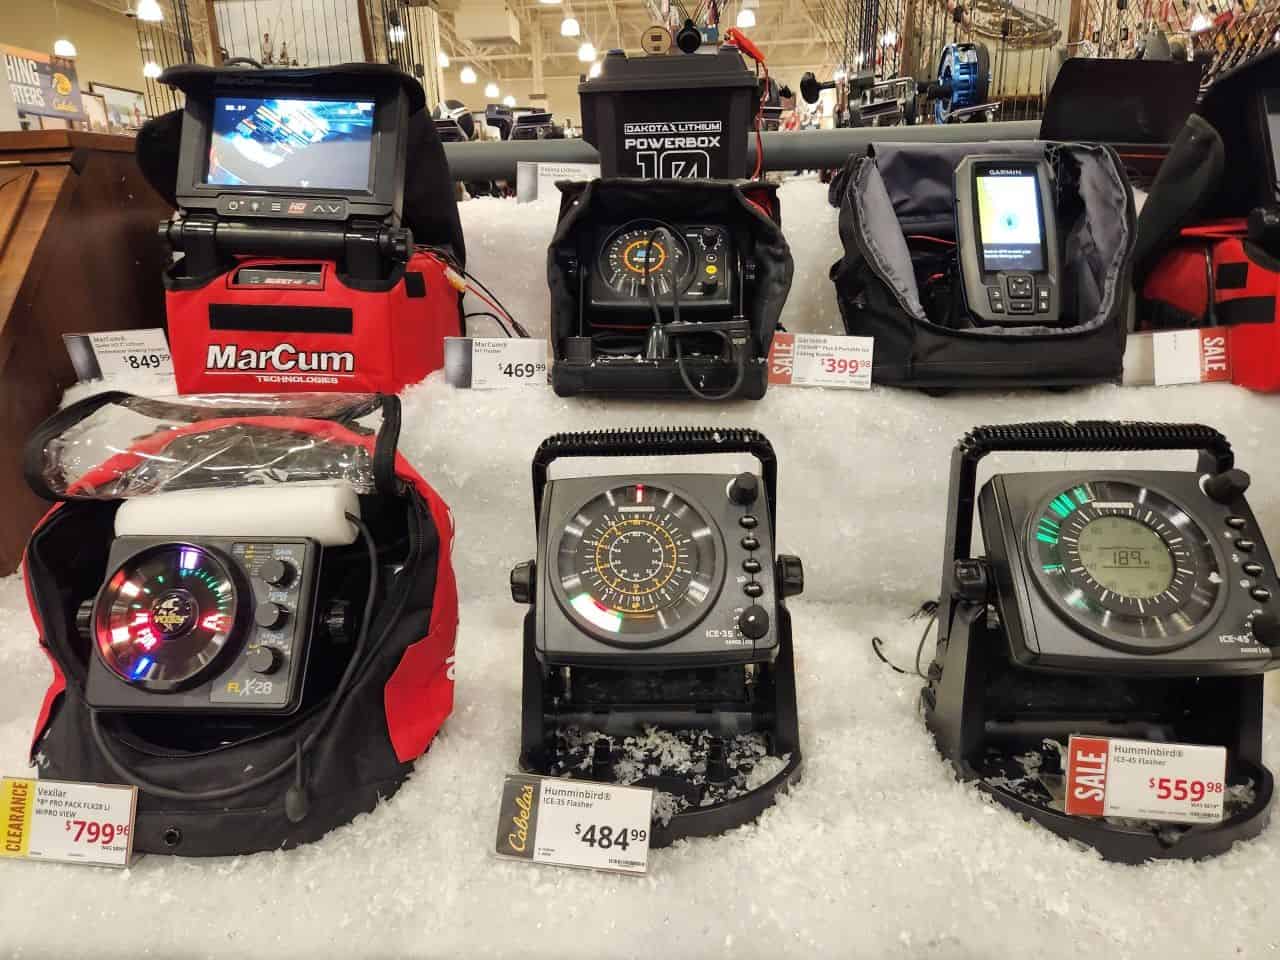 Ice Fishing Checklist For a Successful Day of Fishing - Member Stories